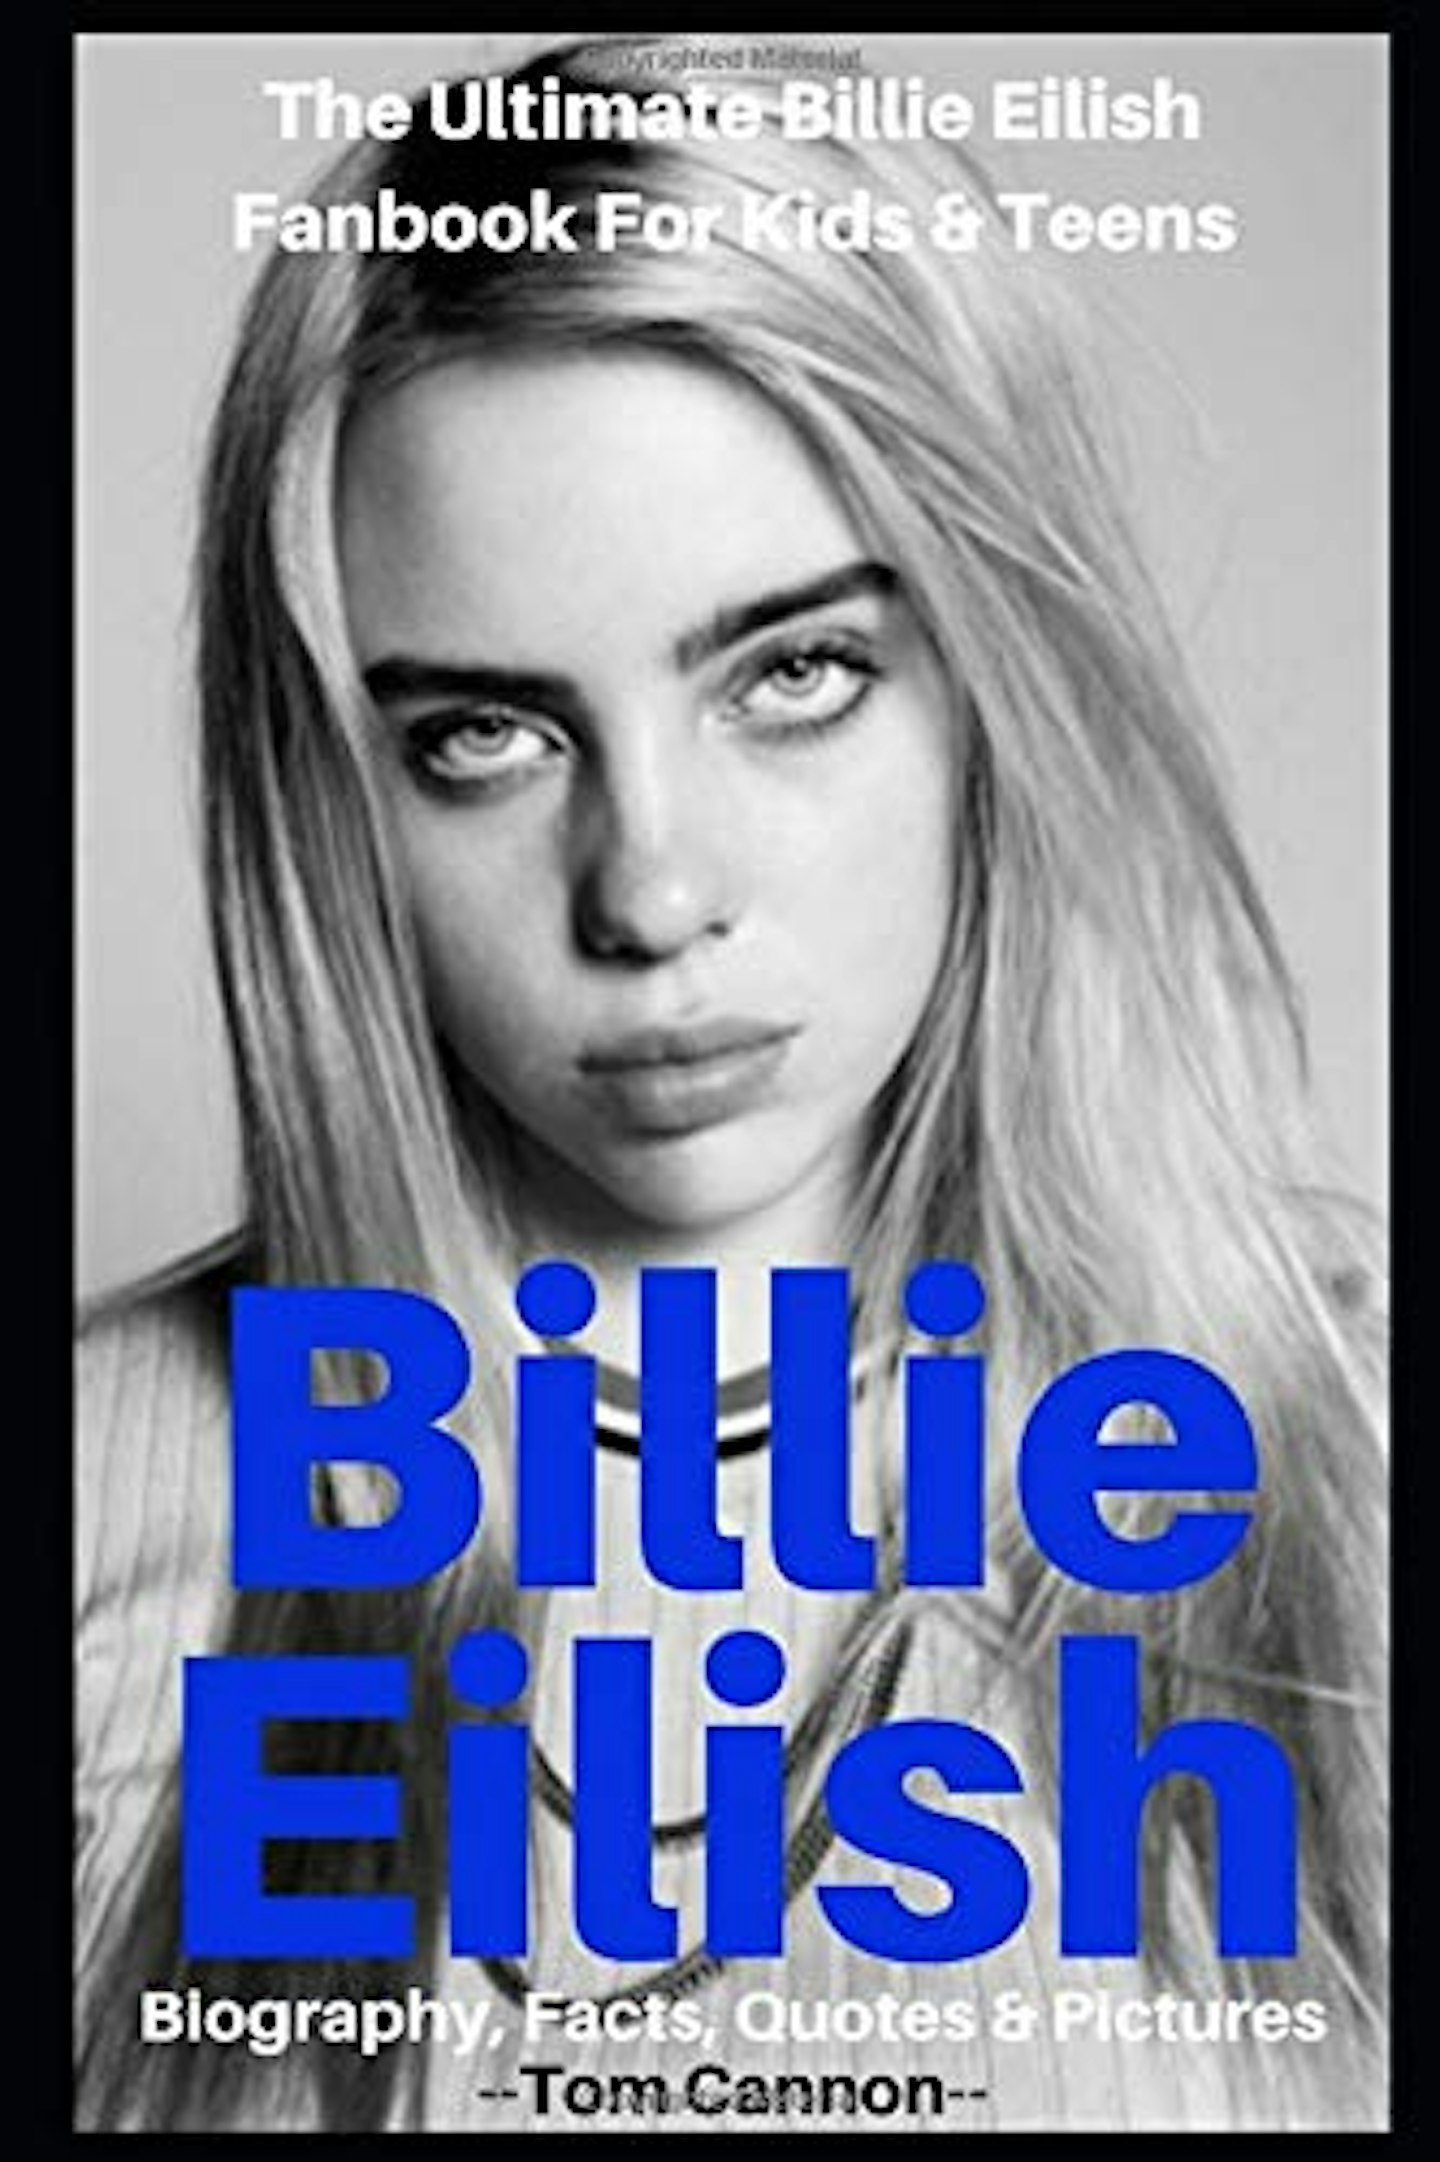 Billie Eilish: Biography, Facts, Quotes and Pictures by Tom Cannon, £5.50